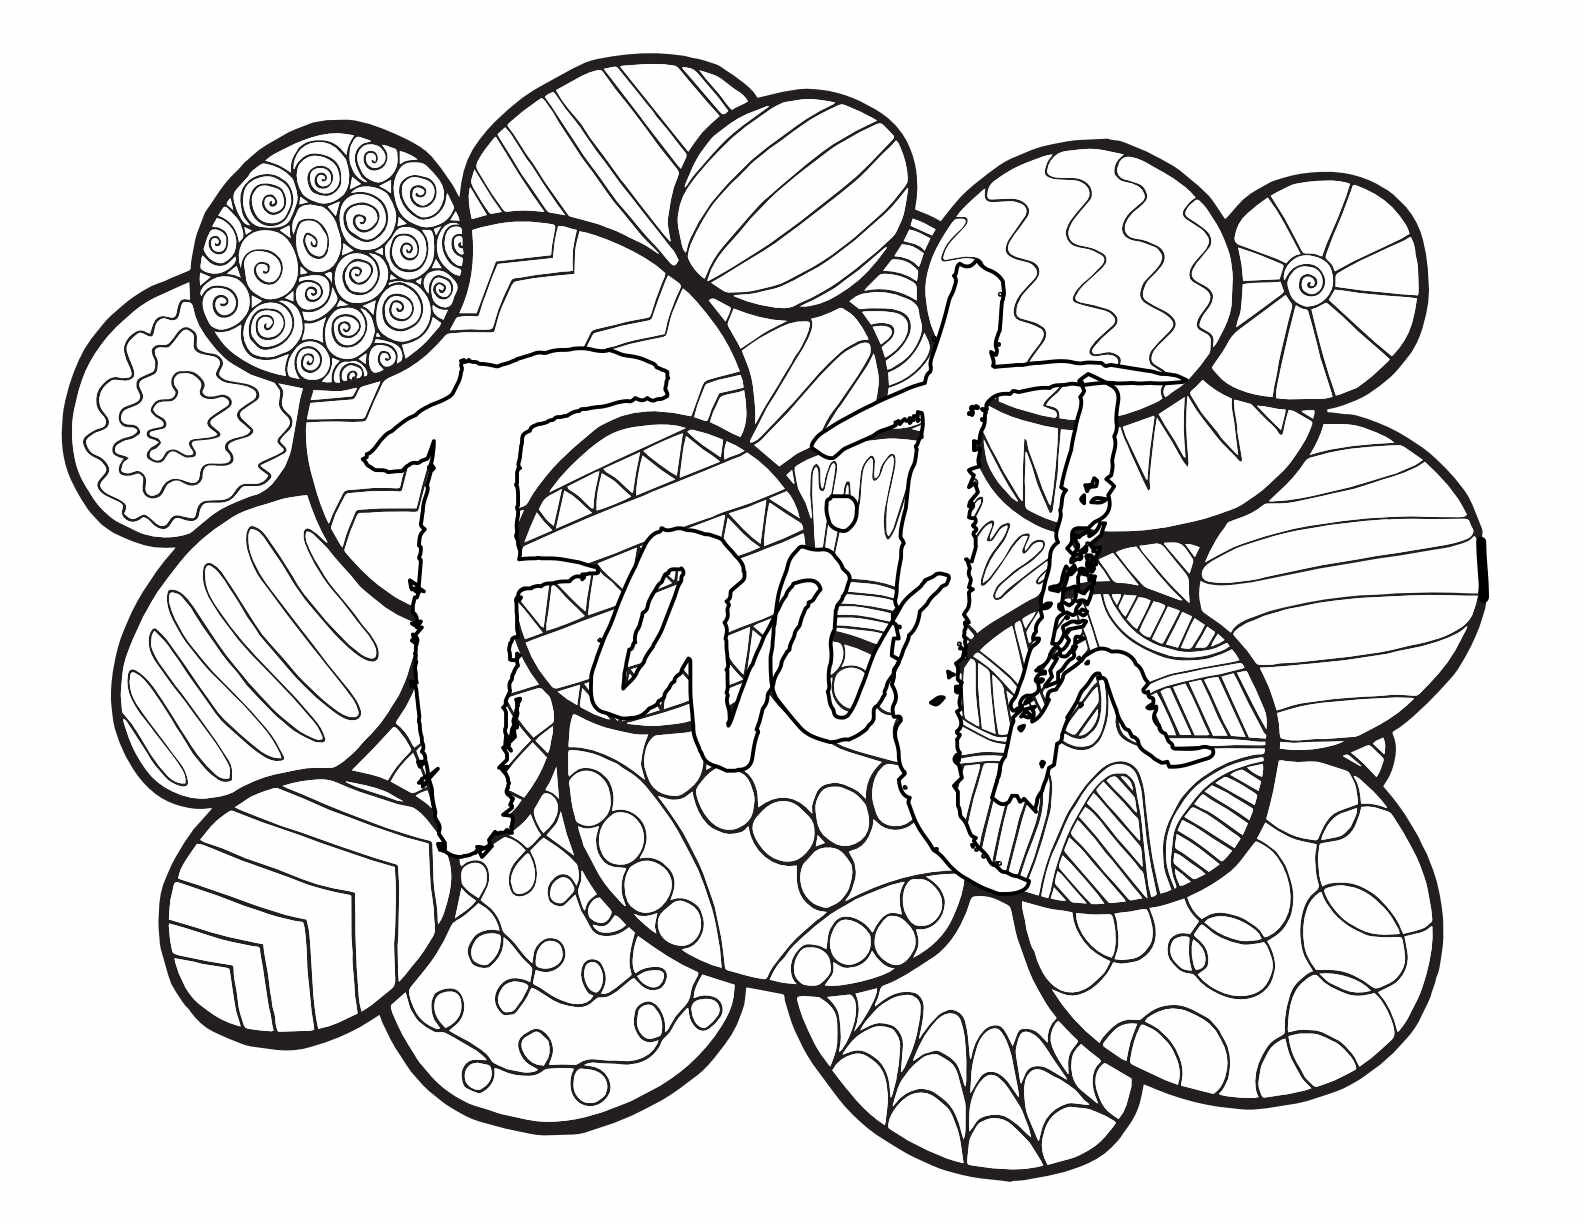 3 FREE FAITH PRINTABLE COLORING PAGES CLICK HERE TO DOWNLOAD THE PAGE ABOVE